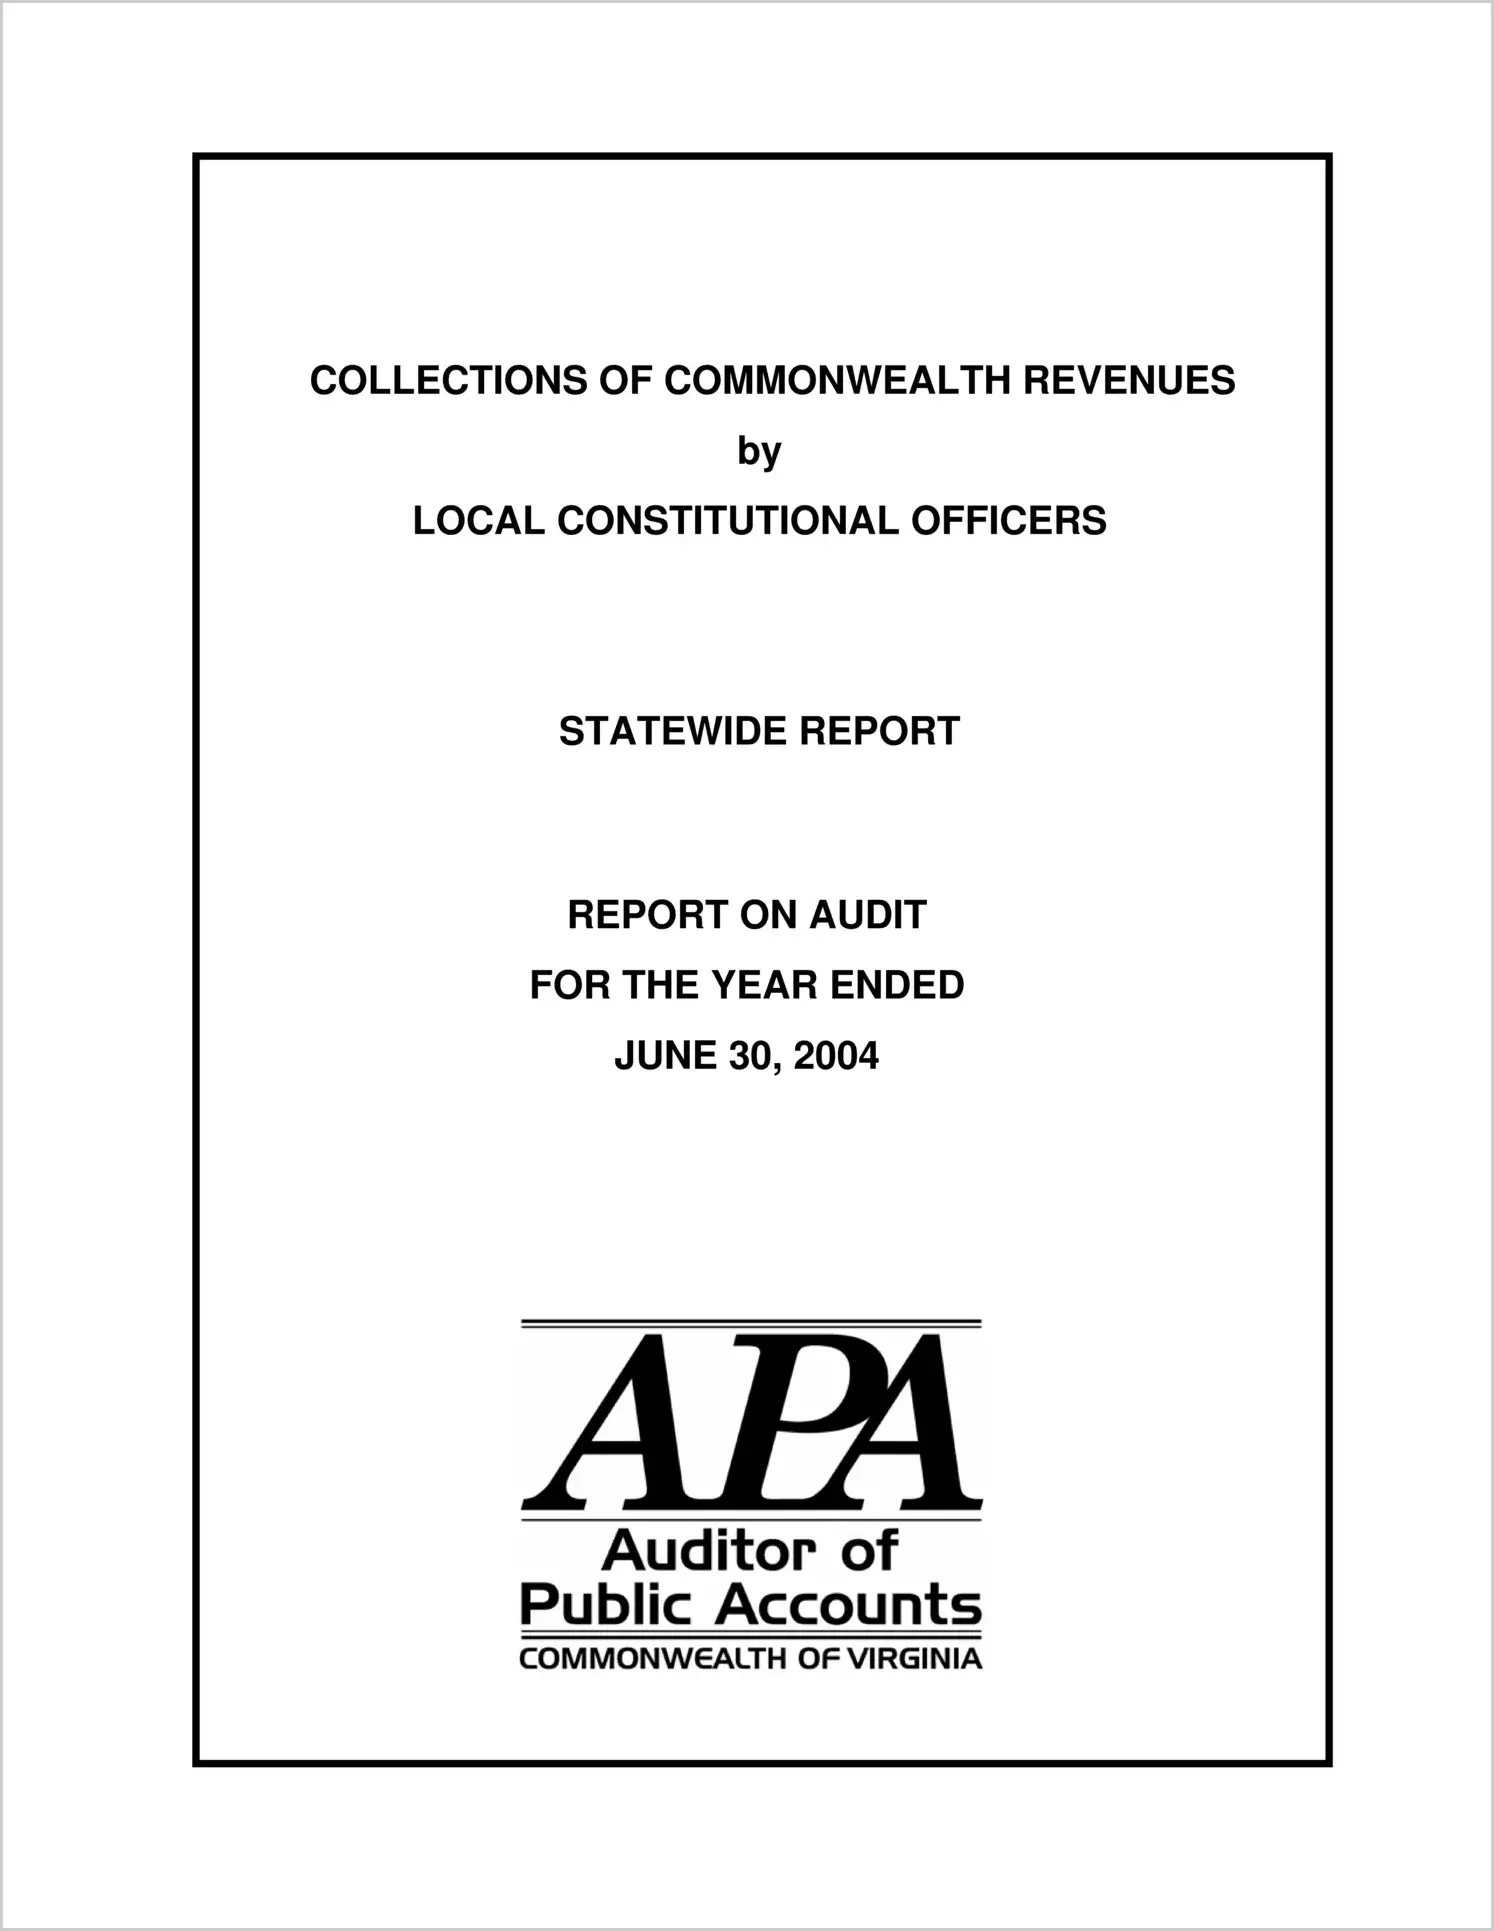 Collections of Commonwealth Revenues by Local Constitutional Officers Statewide Report for the year ended June 30, 2004